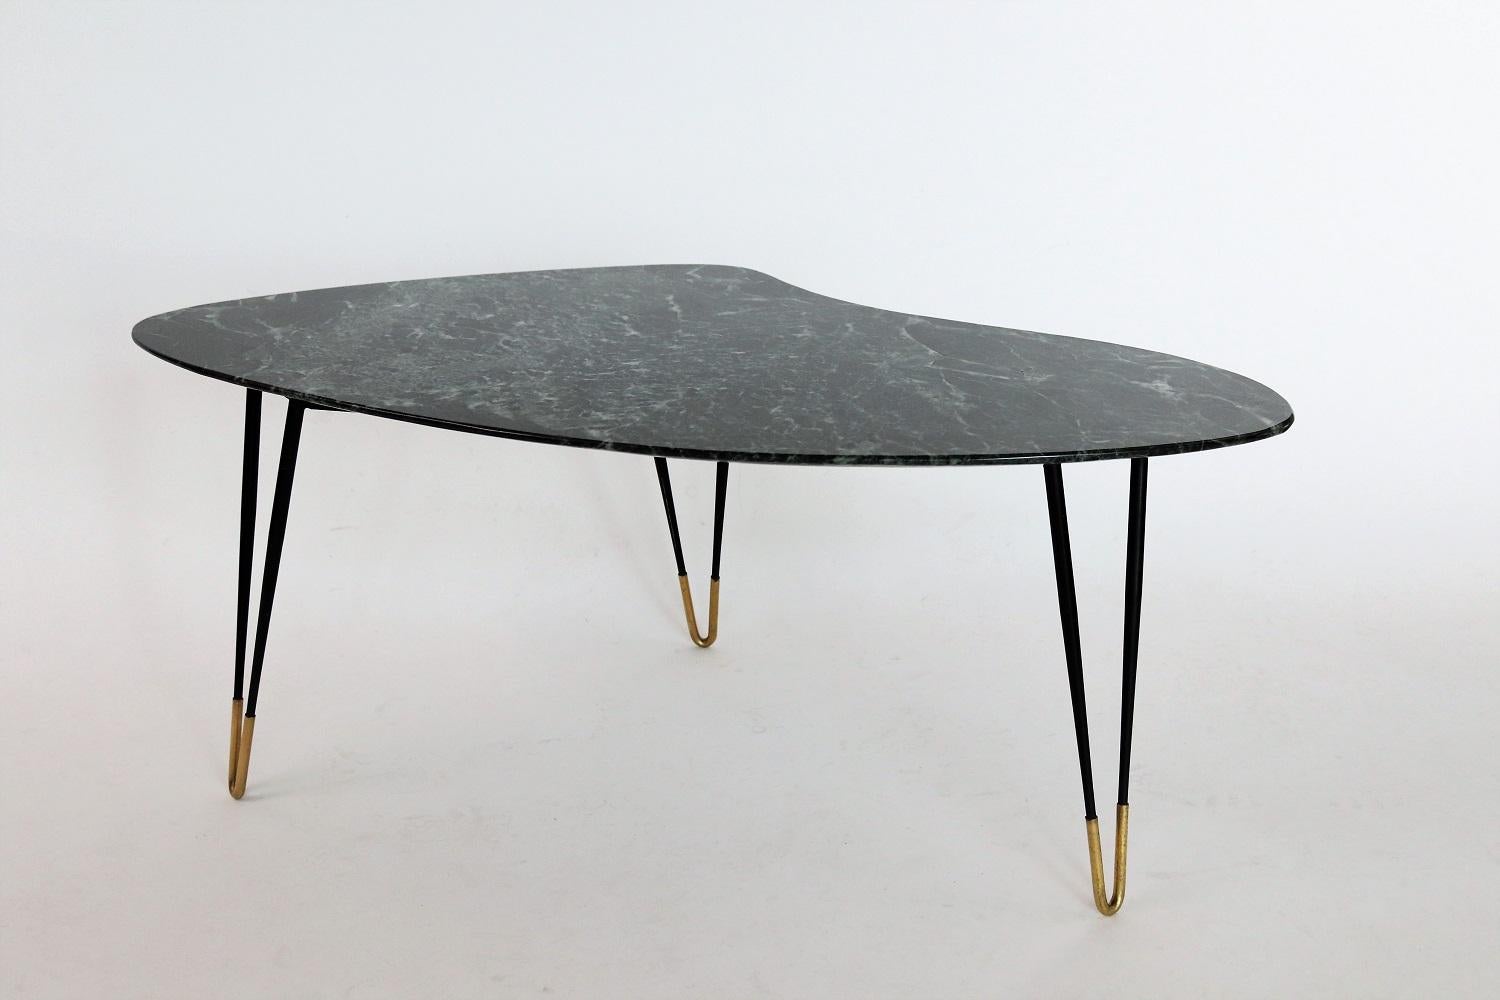 Beautiful coffee table with gorgeous elegant green alps marble top in organic form and metallic hairpin legs with brass tips.
Made in Italy during the 1950s.
The marble is called 